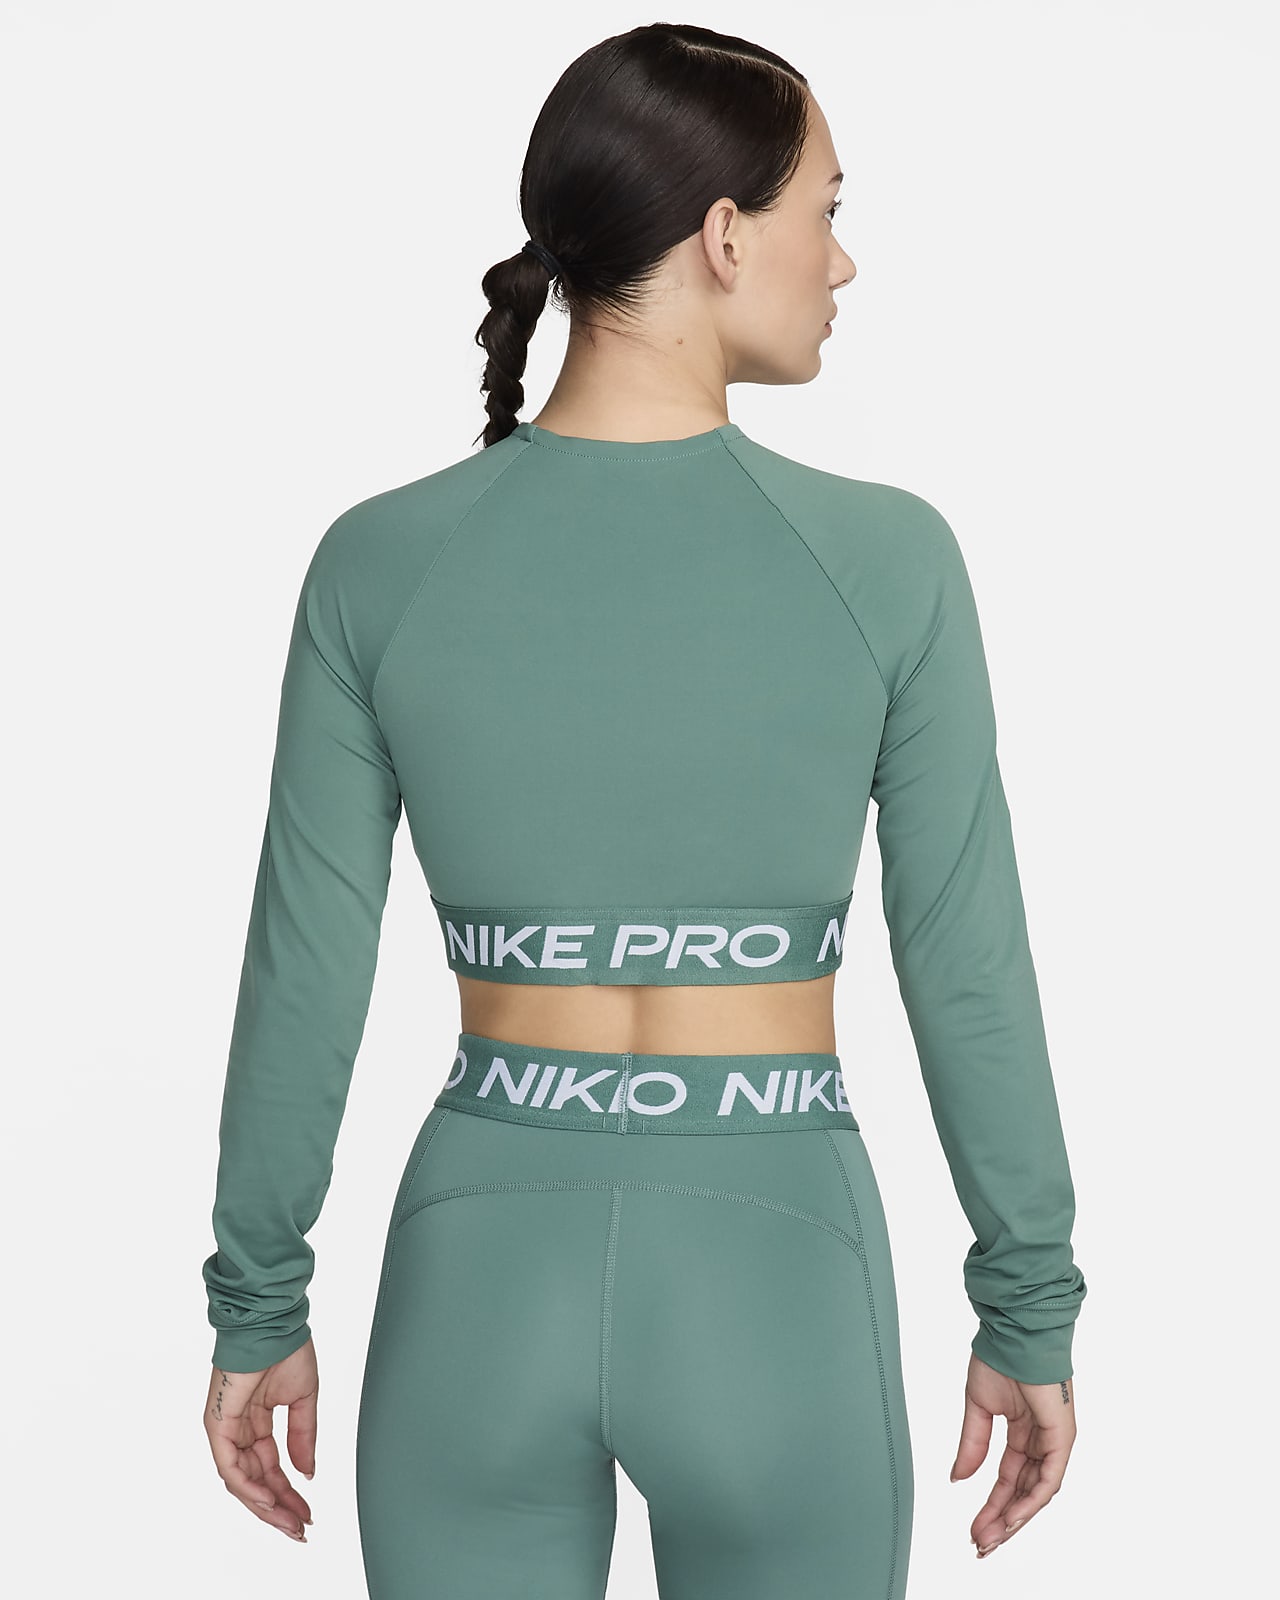 https://static.nike.com/a/images/t_PDP_1280_v1/f_auto,q_auto:eco/4a3d46a9-bf66-49a3-af9e-af79f97134b5/pro-365-womens-dri-fit-cropped-long-sleeve-top-mGlHjV.png